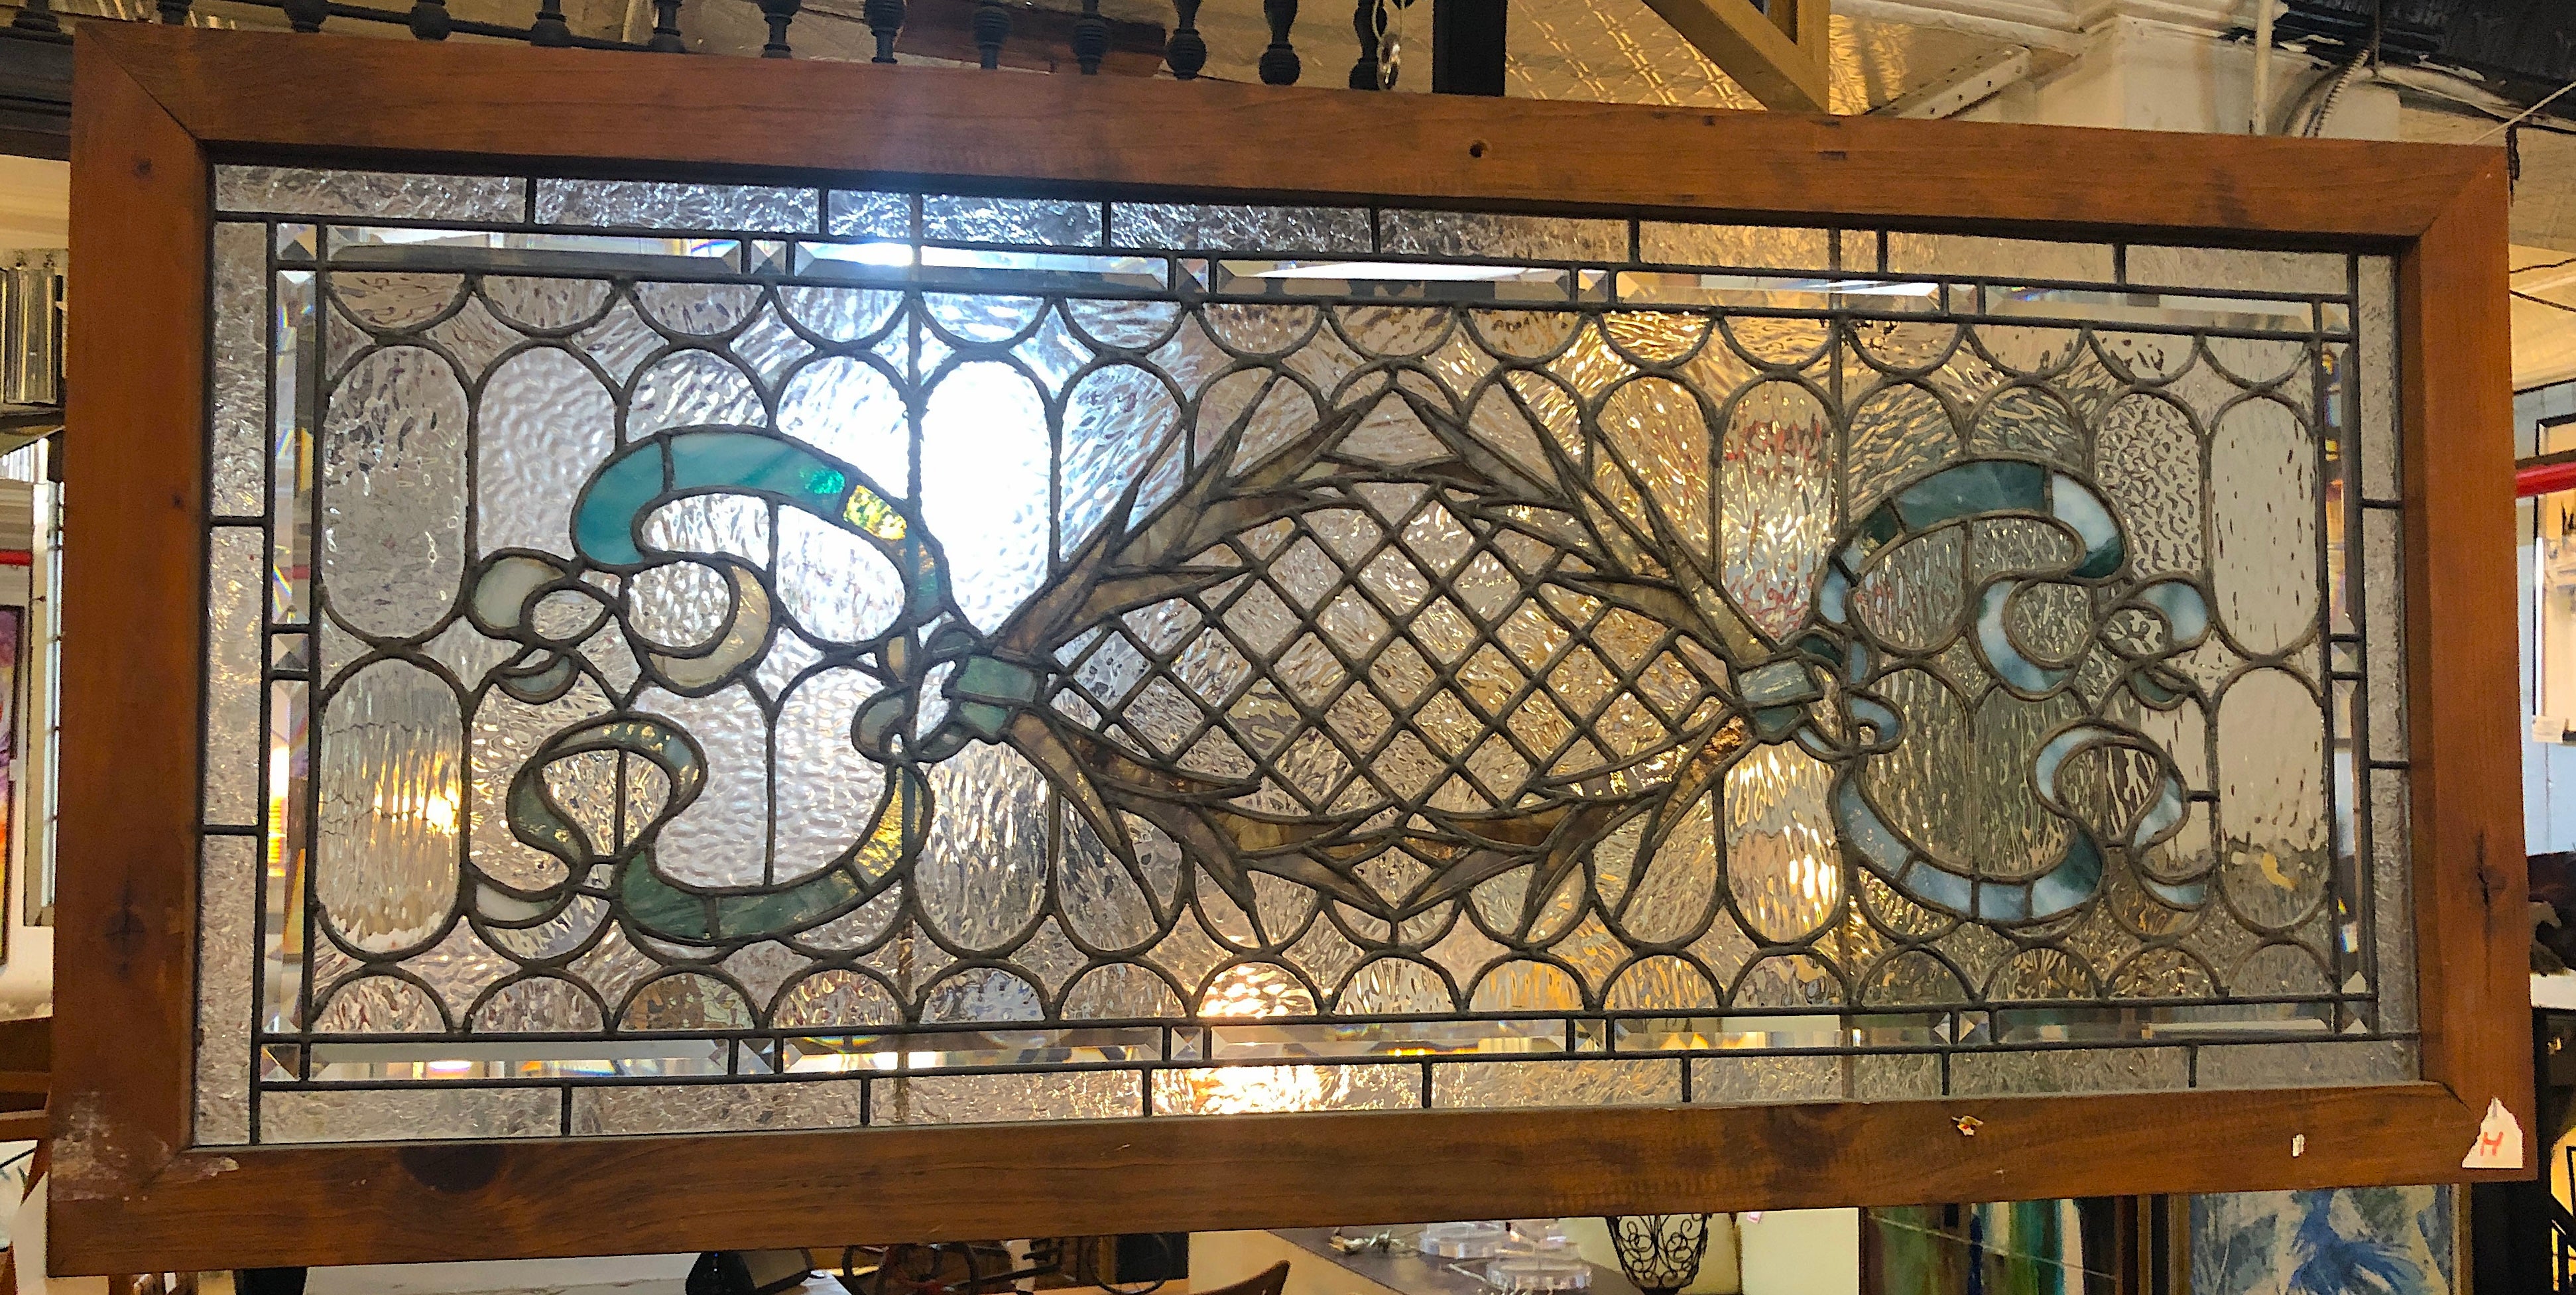 Long stained glass transom window from the turn of the century. Decorative wreath and ribbon design.
Currently housed in a temporary wooden frame - the overall dimensions are for the stained glass and the frame.
Located in NY